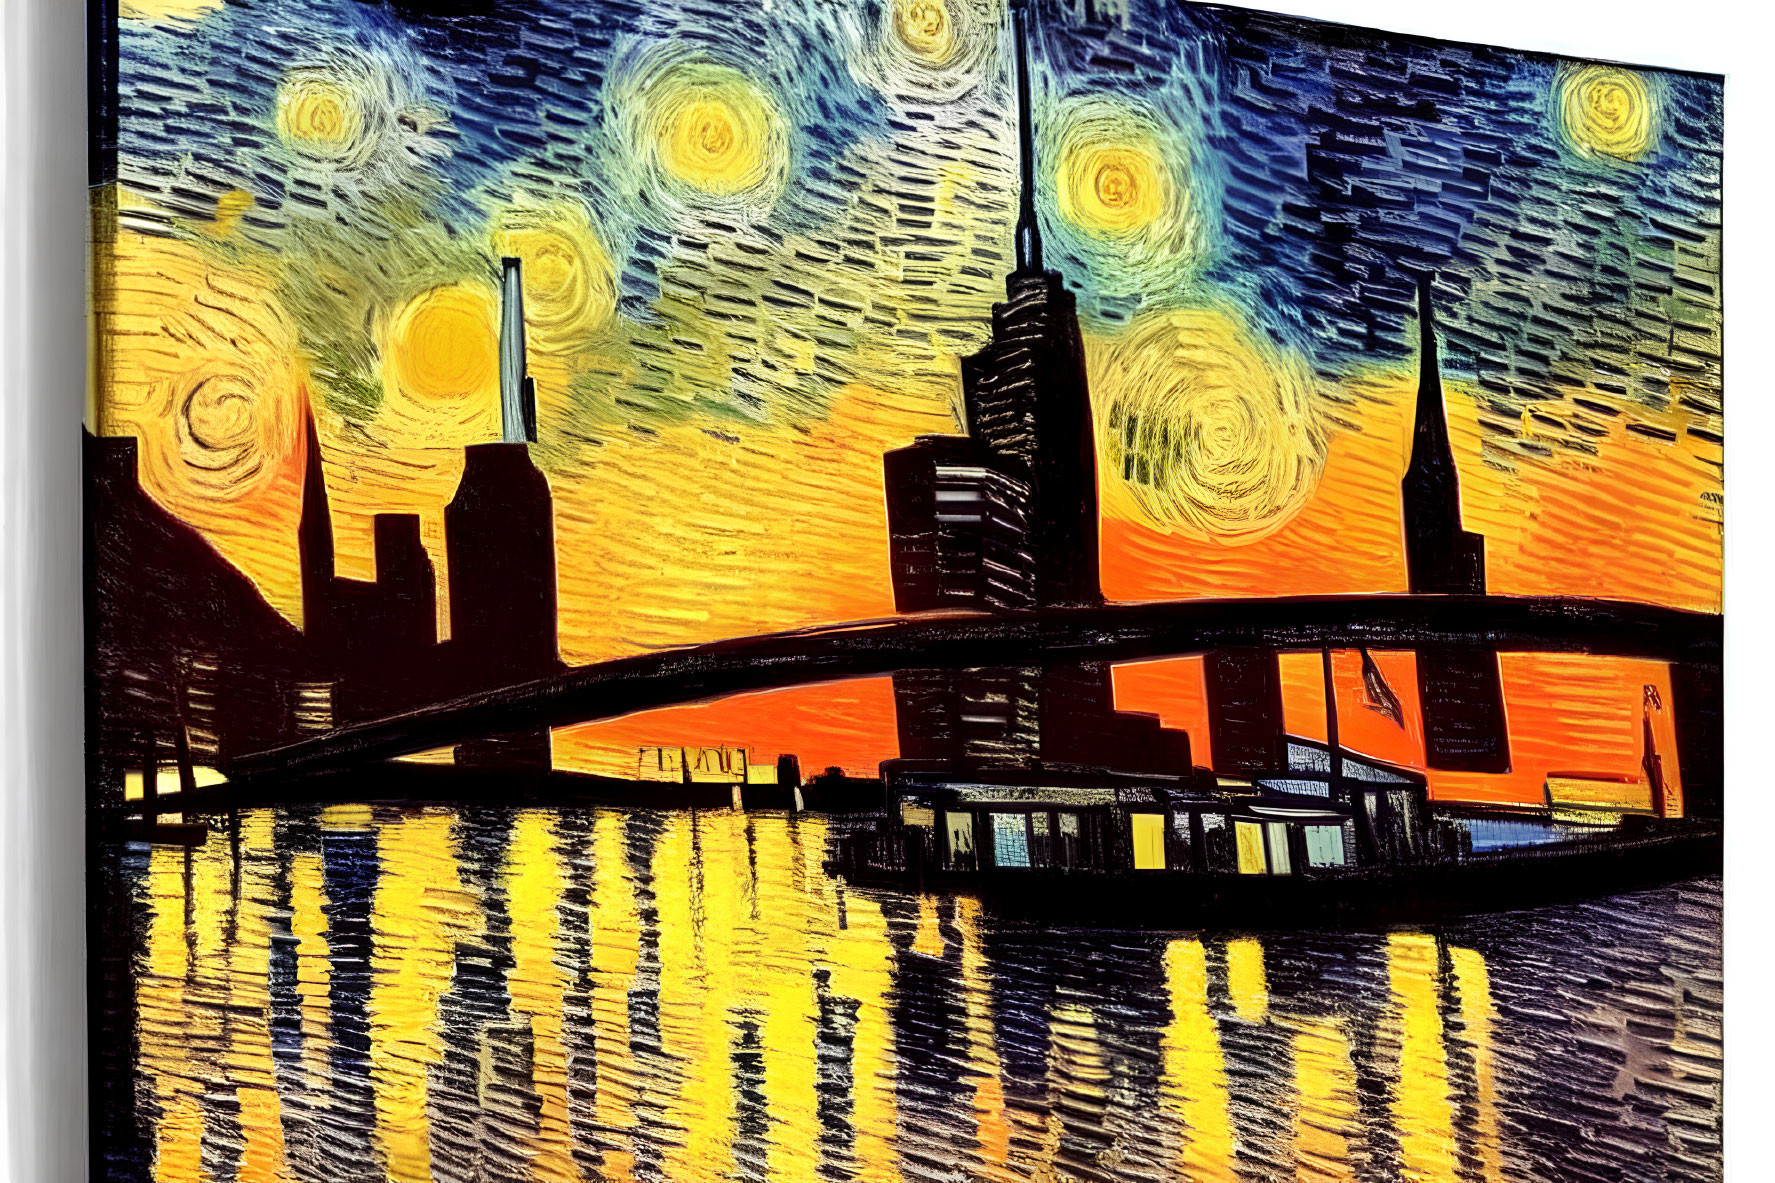 Colorful cityscape painting with starry-night sky and water reflections